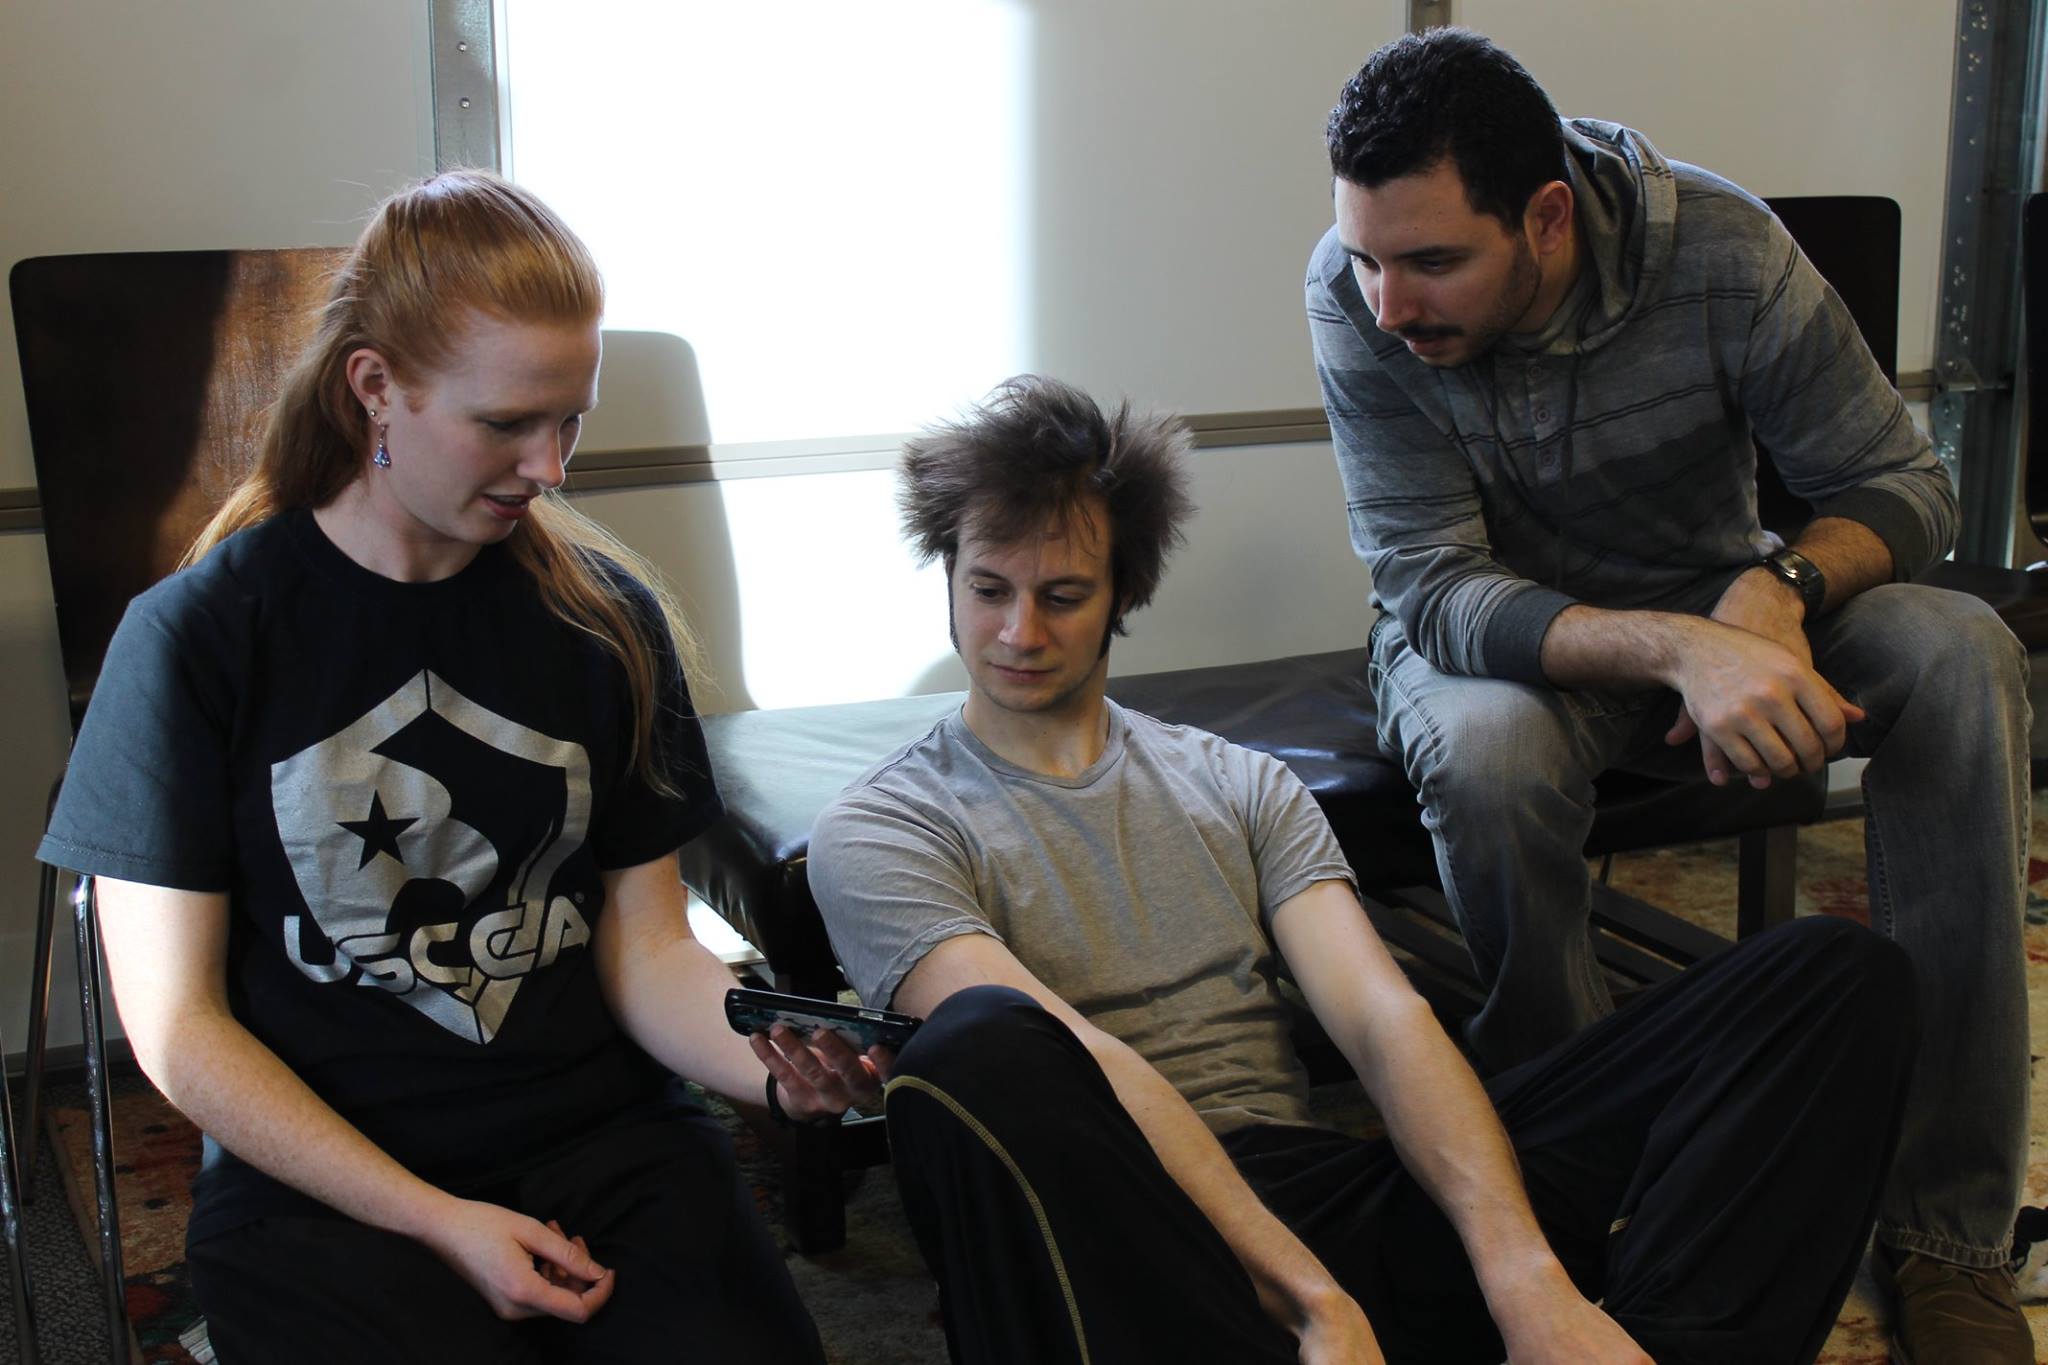 Discussing fight choreography with actors Dana and Trevor in preparation for filming THE RETURN OF THE DRAGON SWORD.